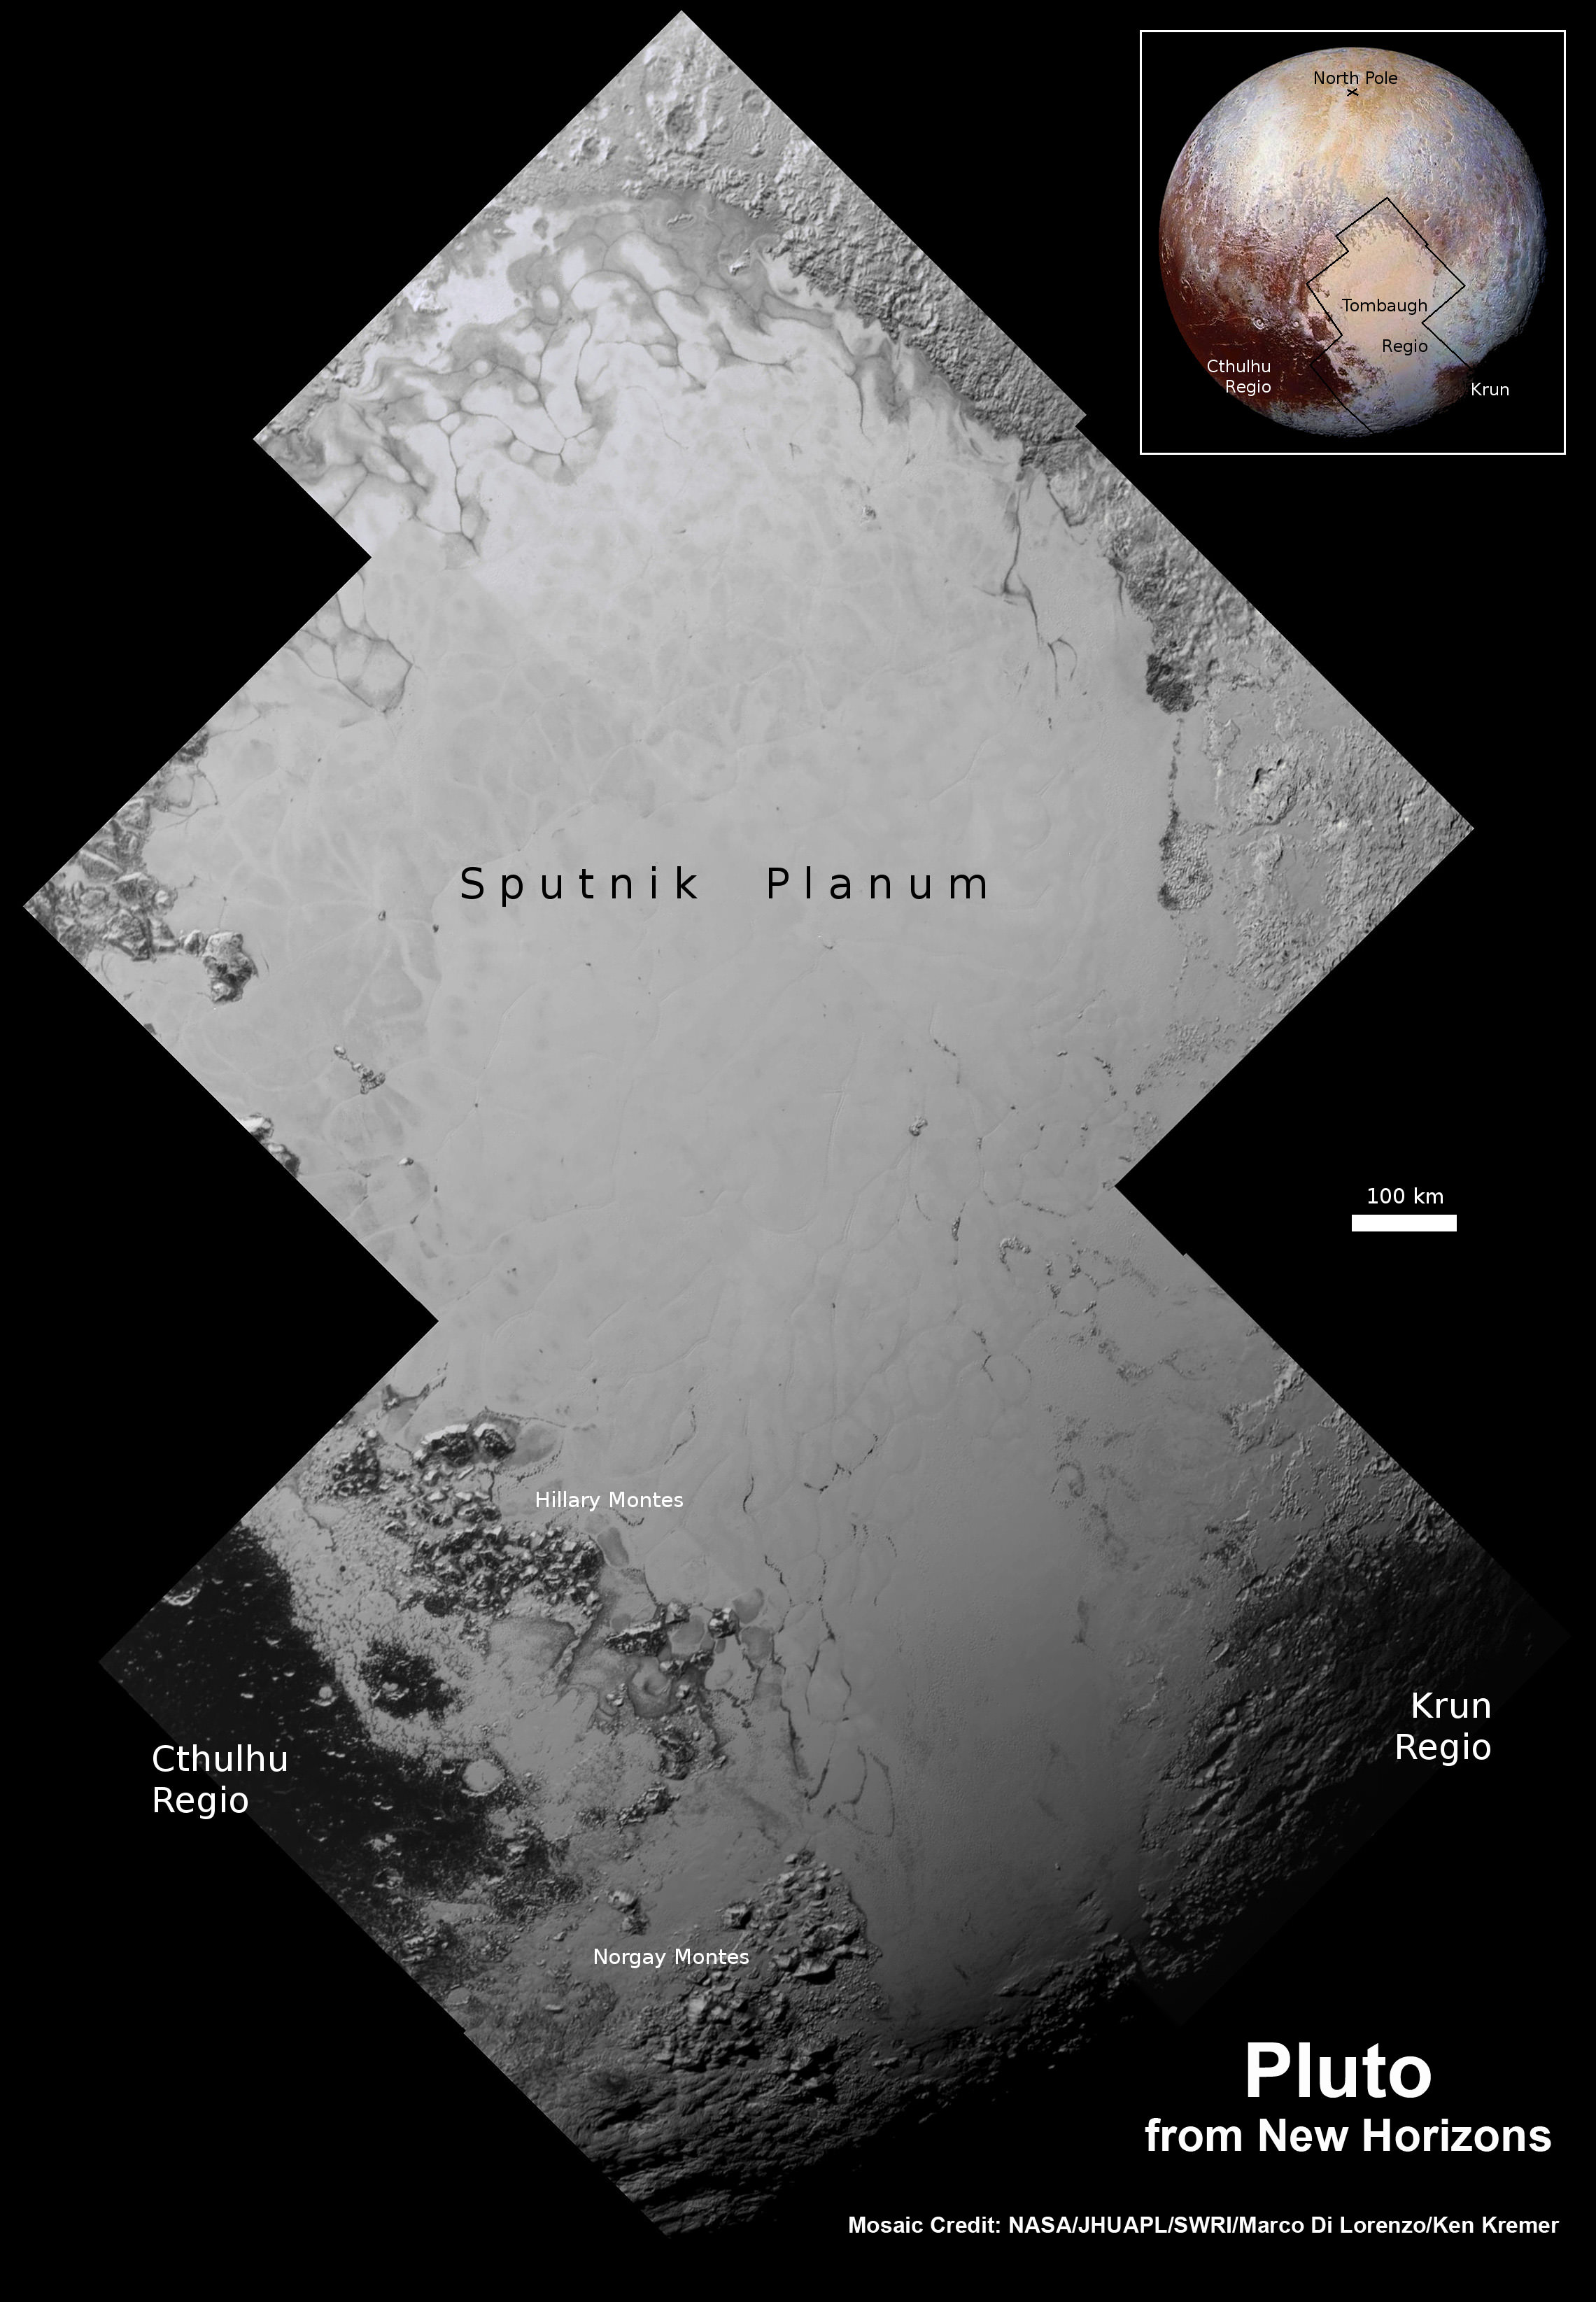 Highest resolution mosaic of ‘Tombaugh Regio’ shows the heart-shaped region on Pluto focusing on ice flows and plains of ‘Sputnik Planum’ at top and icy mountain ranges of ‘Hillary Montes’ and ‘Norgay Montes’ below.  This new mosaic combines the seven highest resolution images captured by NASA’s New Horizons LORRI imager during history making closest approach flyby on July 14, 2015.  Inset at right shows global view of Pluto with location of mosaic and huge heart-shaped region in context.  Annotated with place names.  Credit: NASA/JHUAPL/SWRI/ Marco Di Lorenzo/Ken Kremer/kenkremer.com   